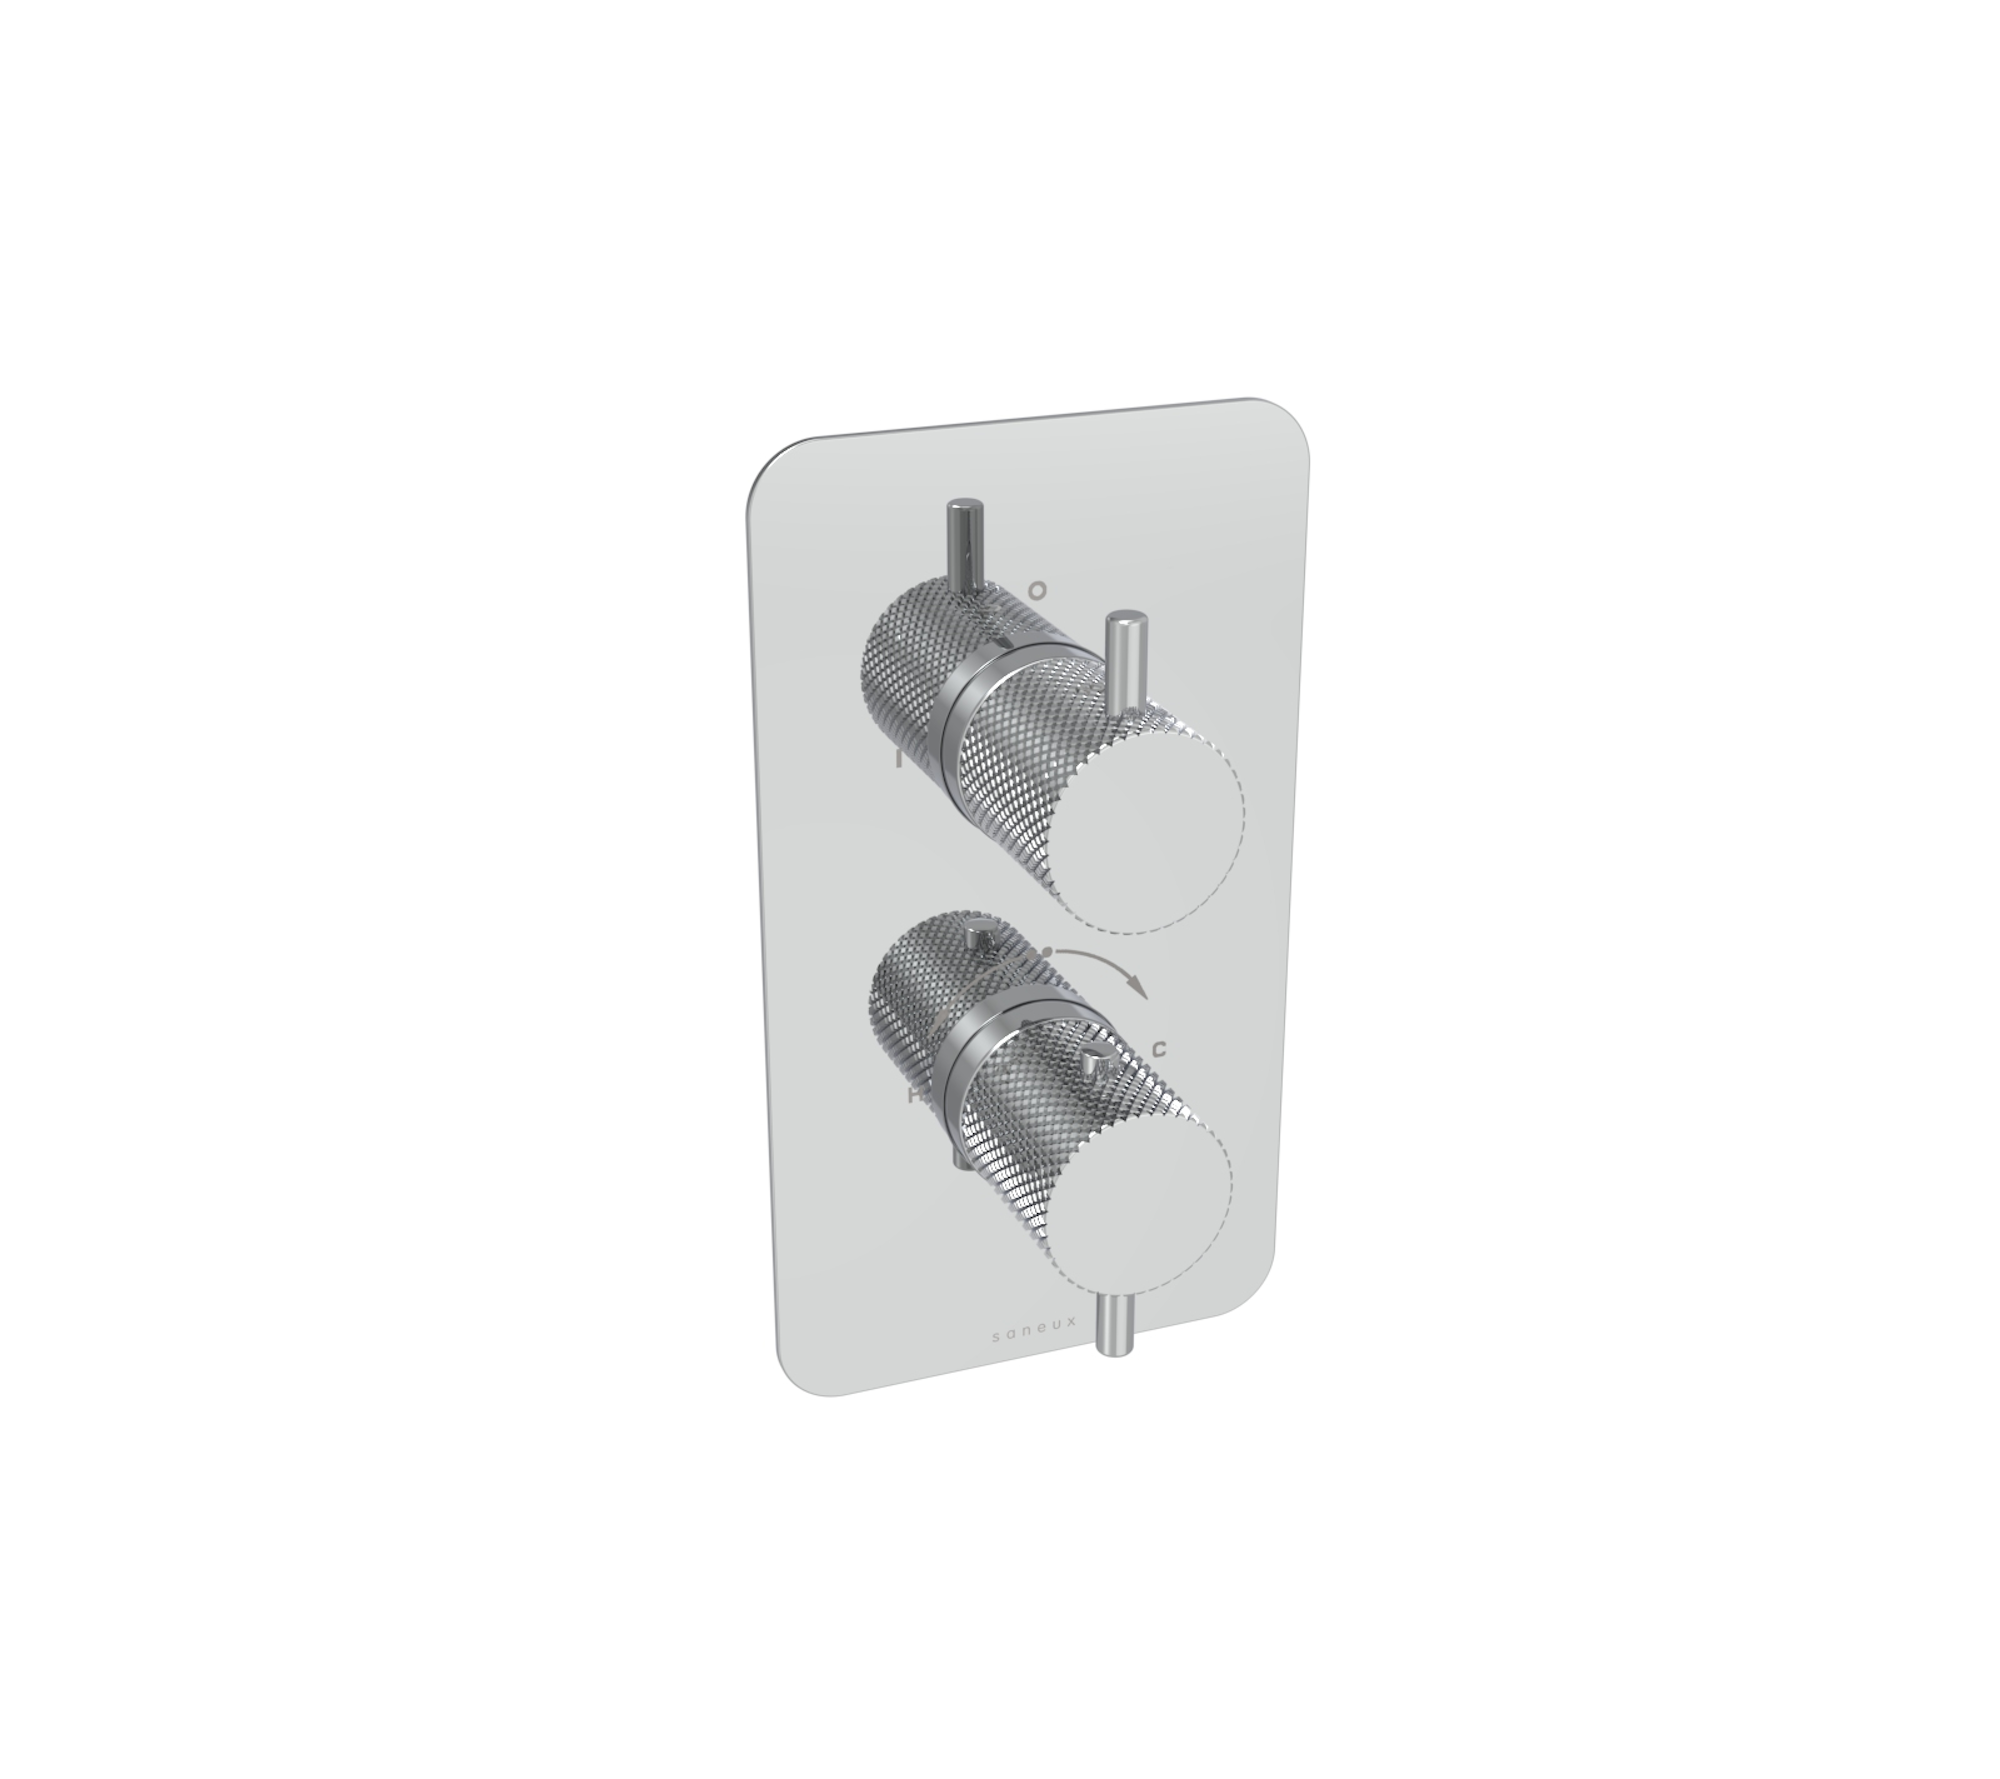 COS 2 way thermostatic shower valve kit with knurled handles - Chrome